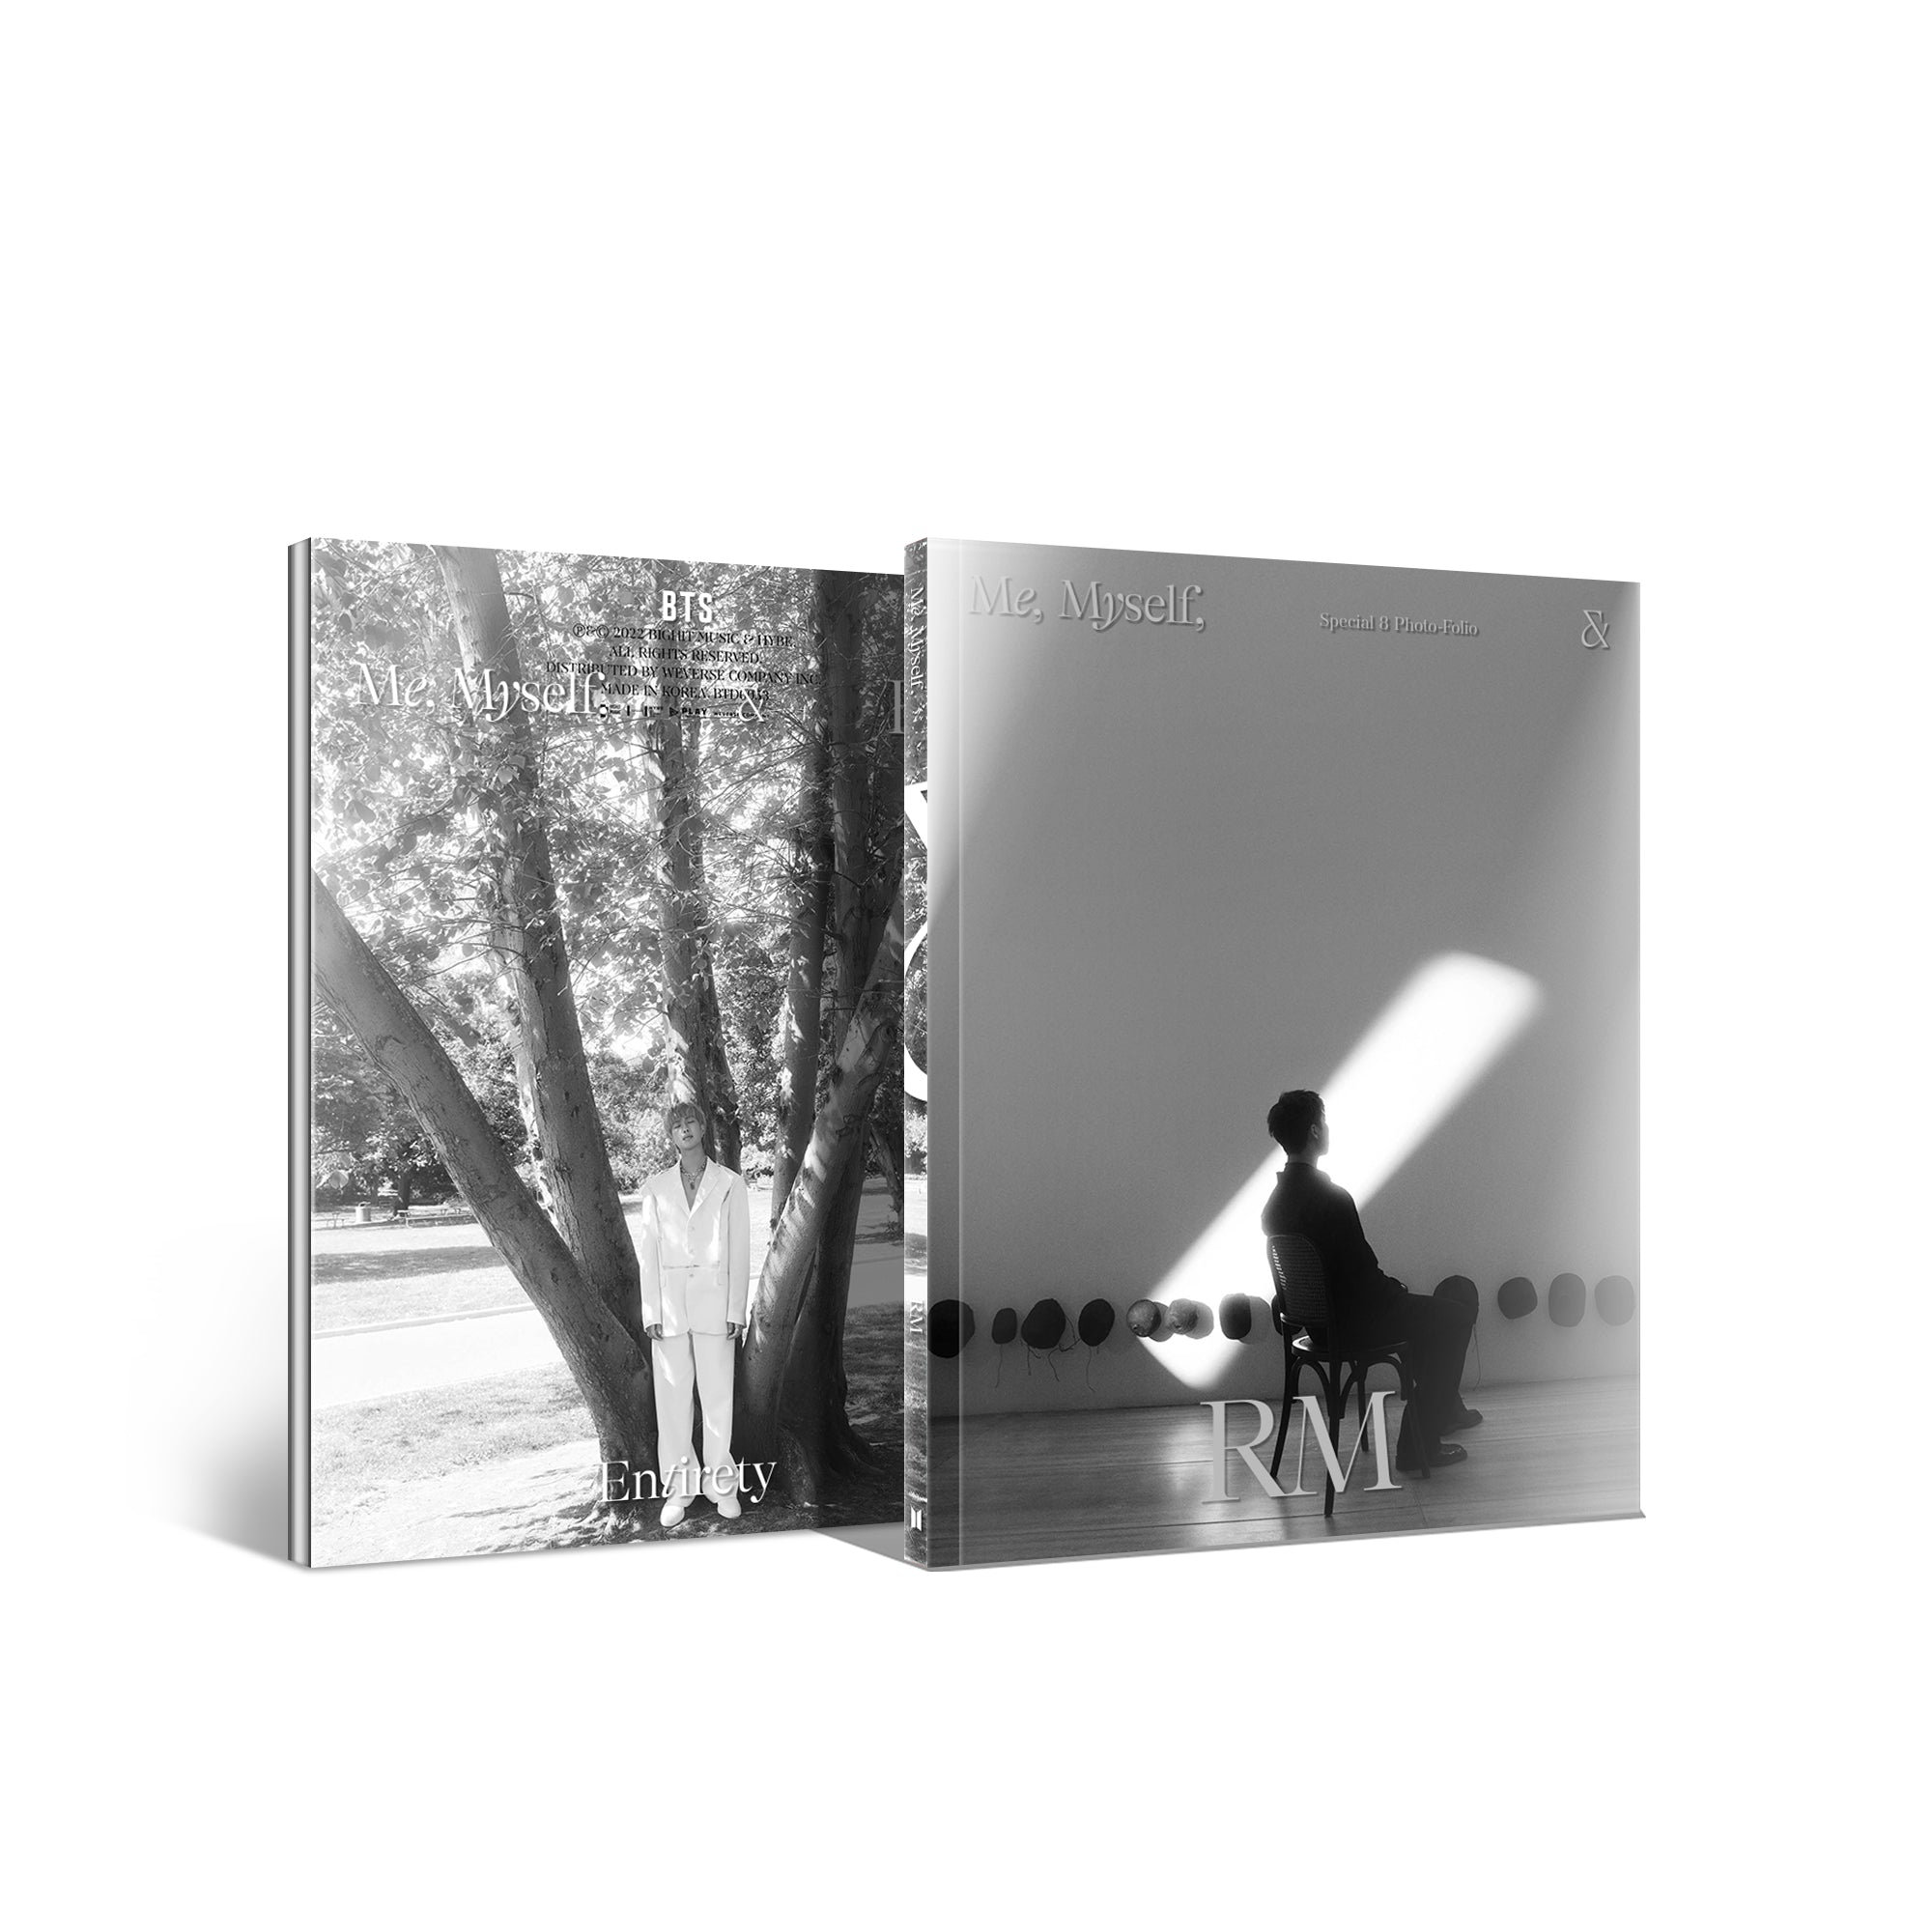 RM (BTS) - Special 8 Photo-Folio Me, Myself, and RM 'Entirety' (2nd Press)